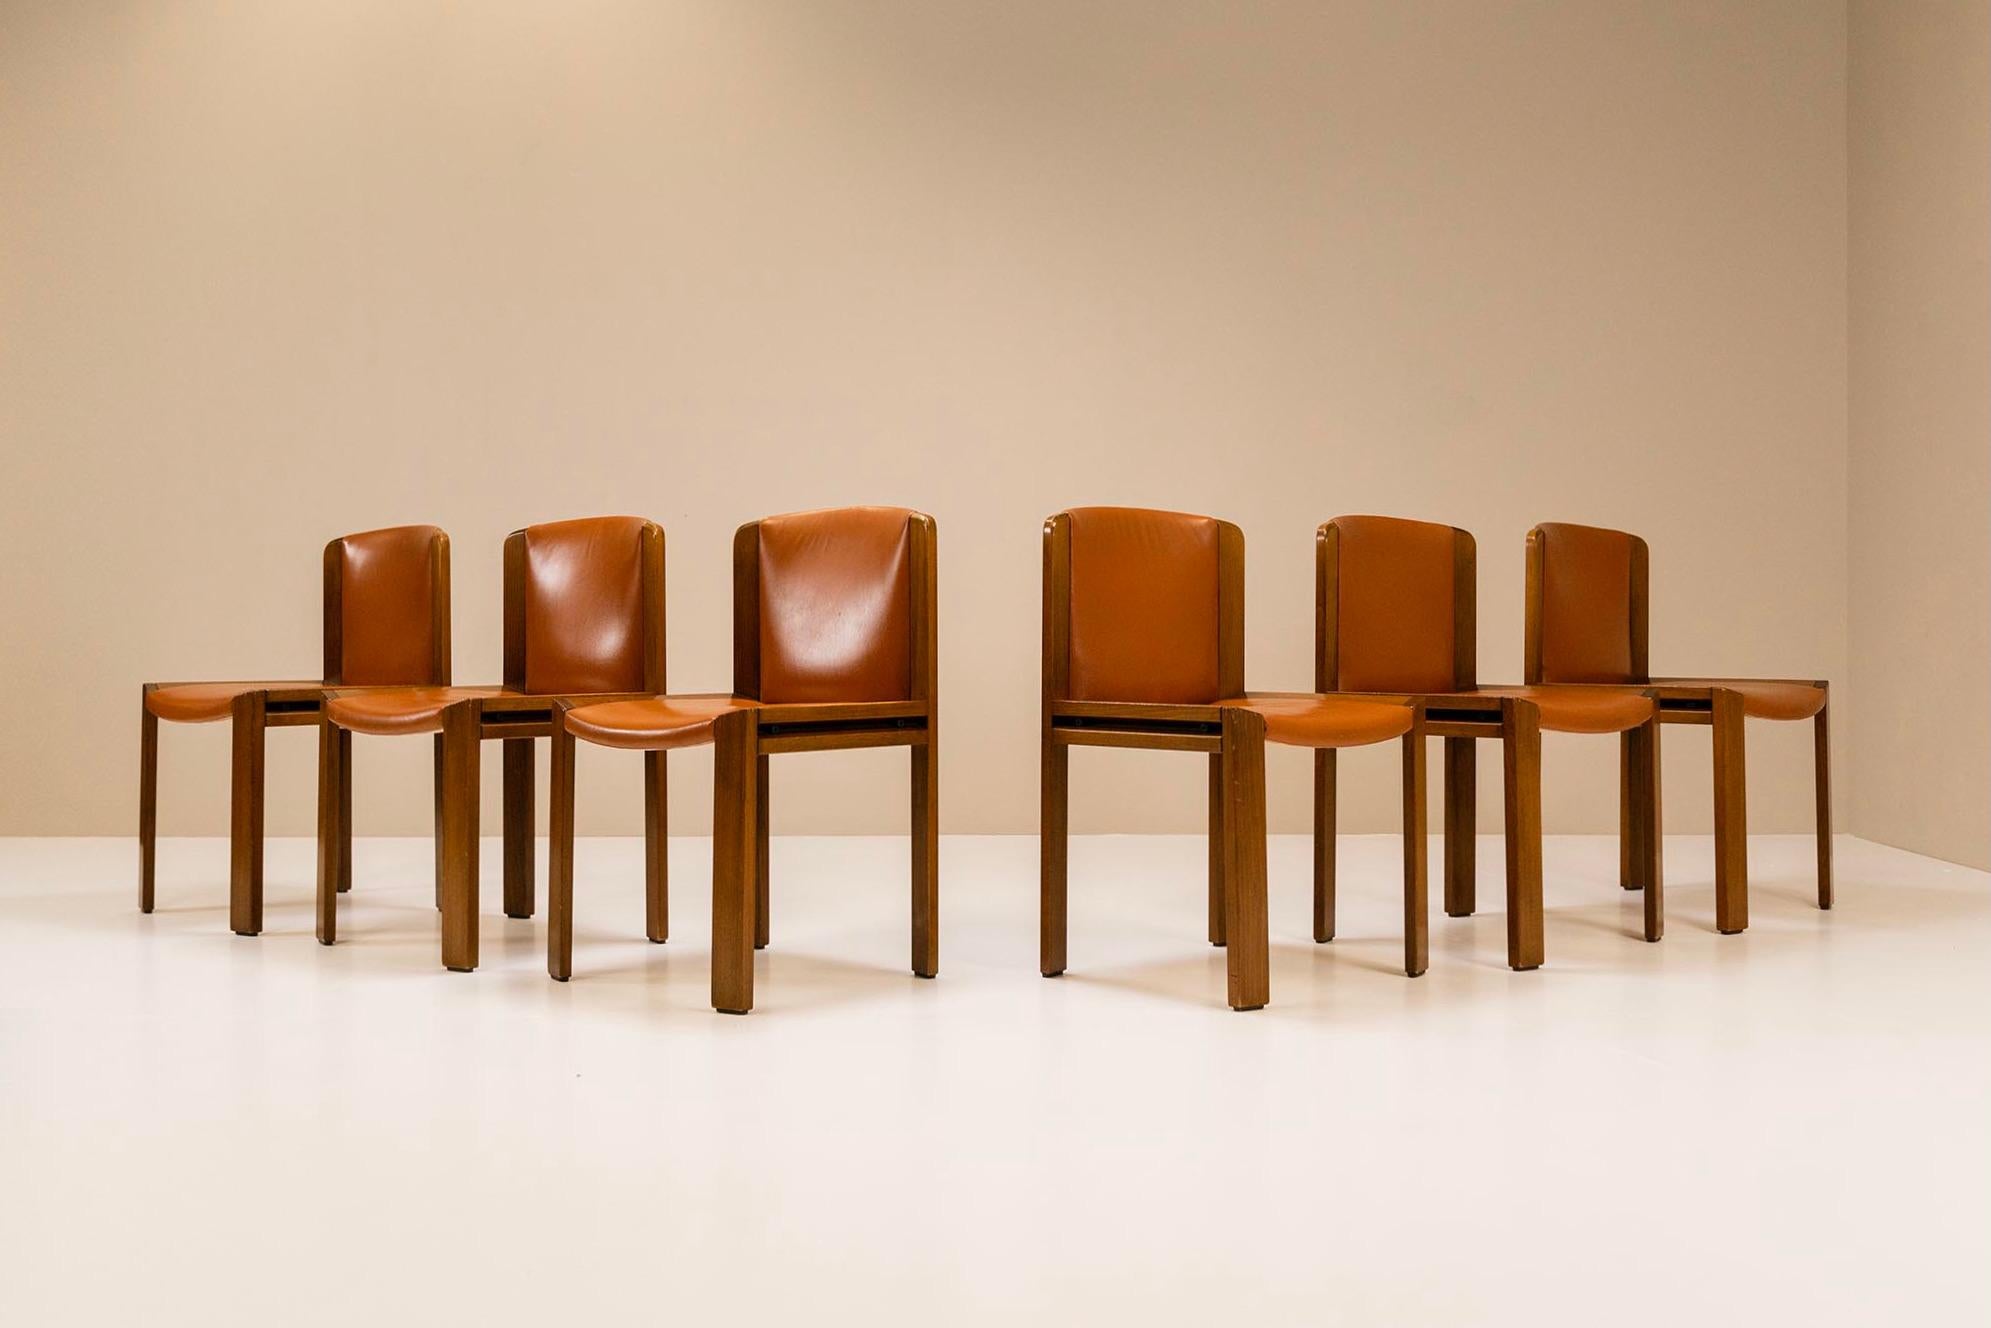 A very pleasant set of six 'model 300' chairs designed by Joe Colombo in 1965 for the Italian manufacturer Pozzi. Colombo was convinced that functionality should come first, and the result was a complete focus on the user. Ahead of his time, he used